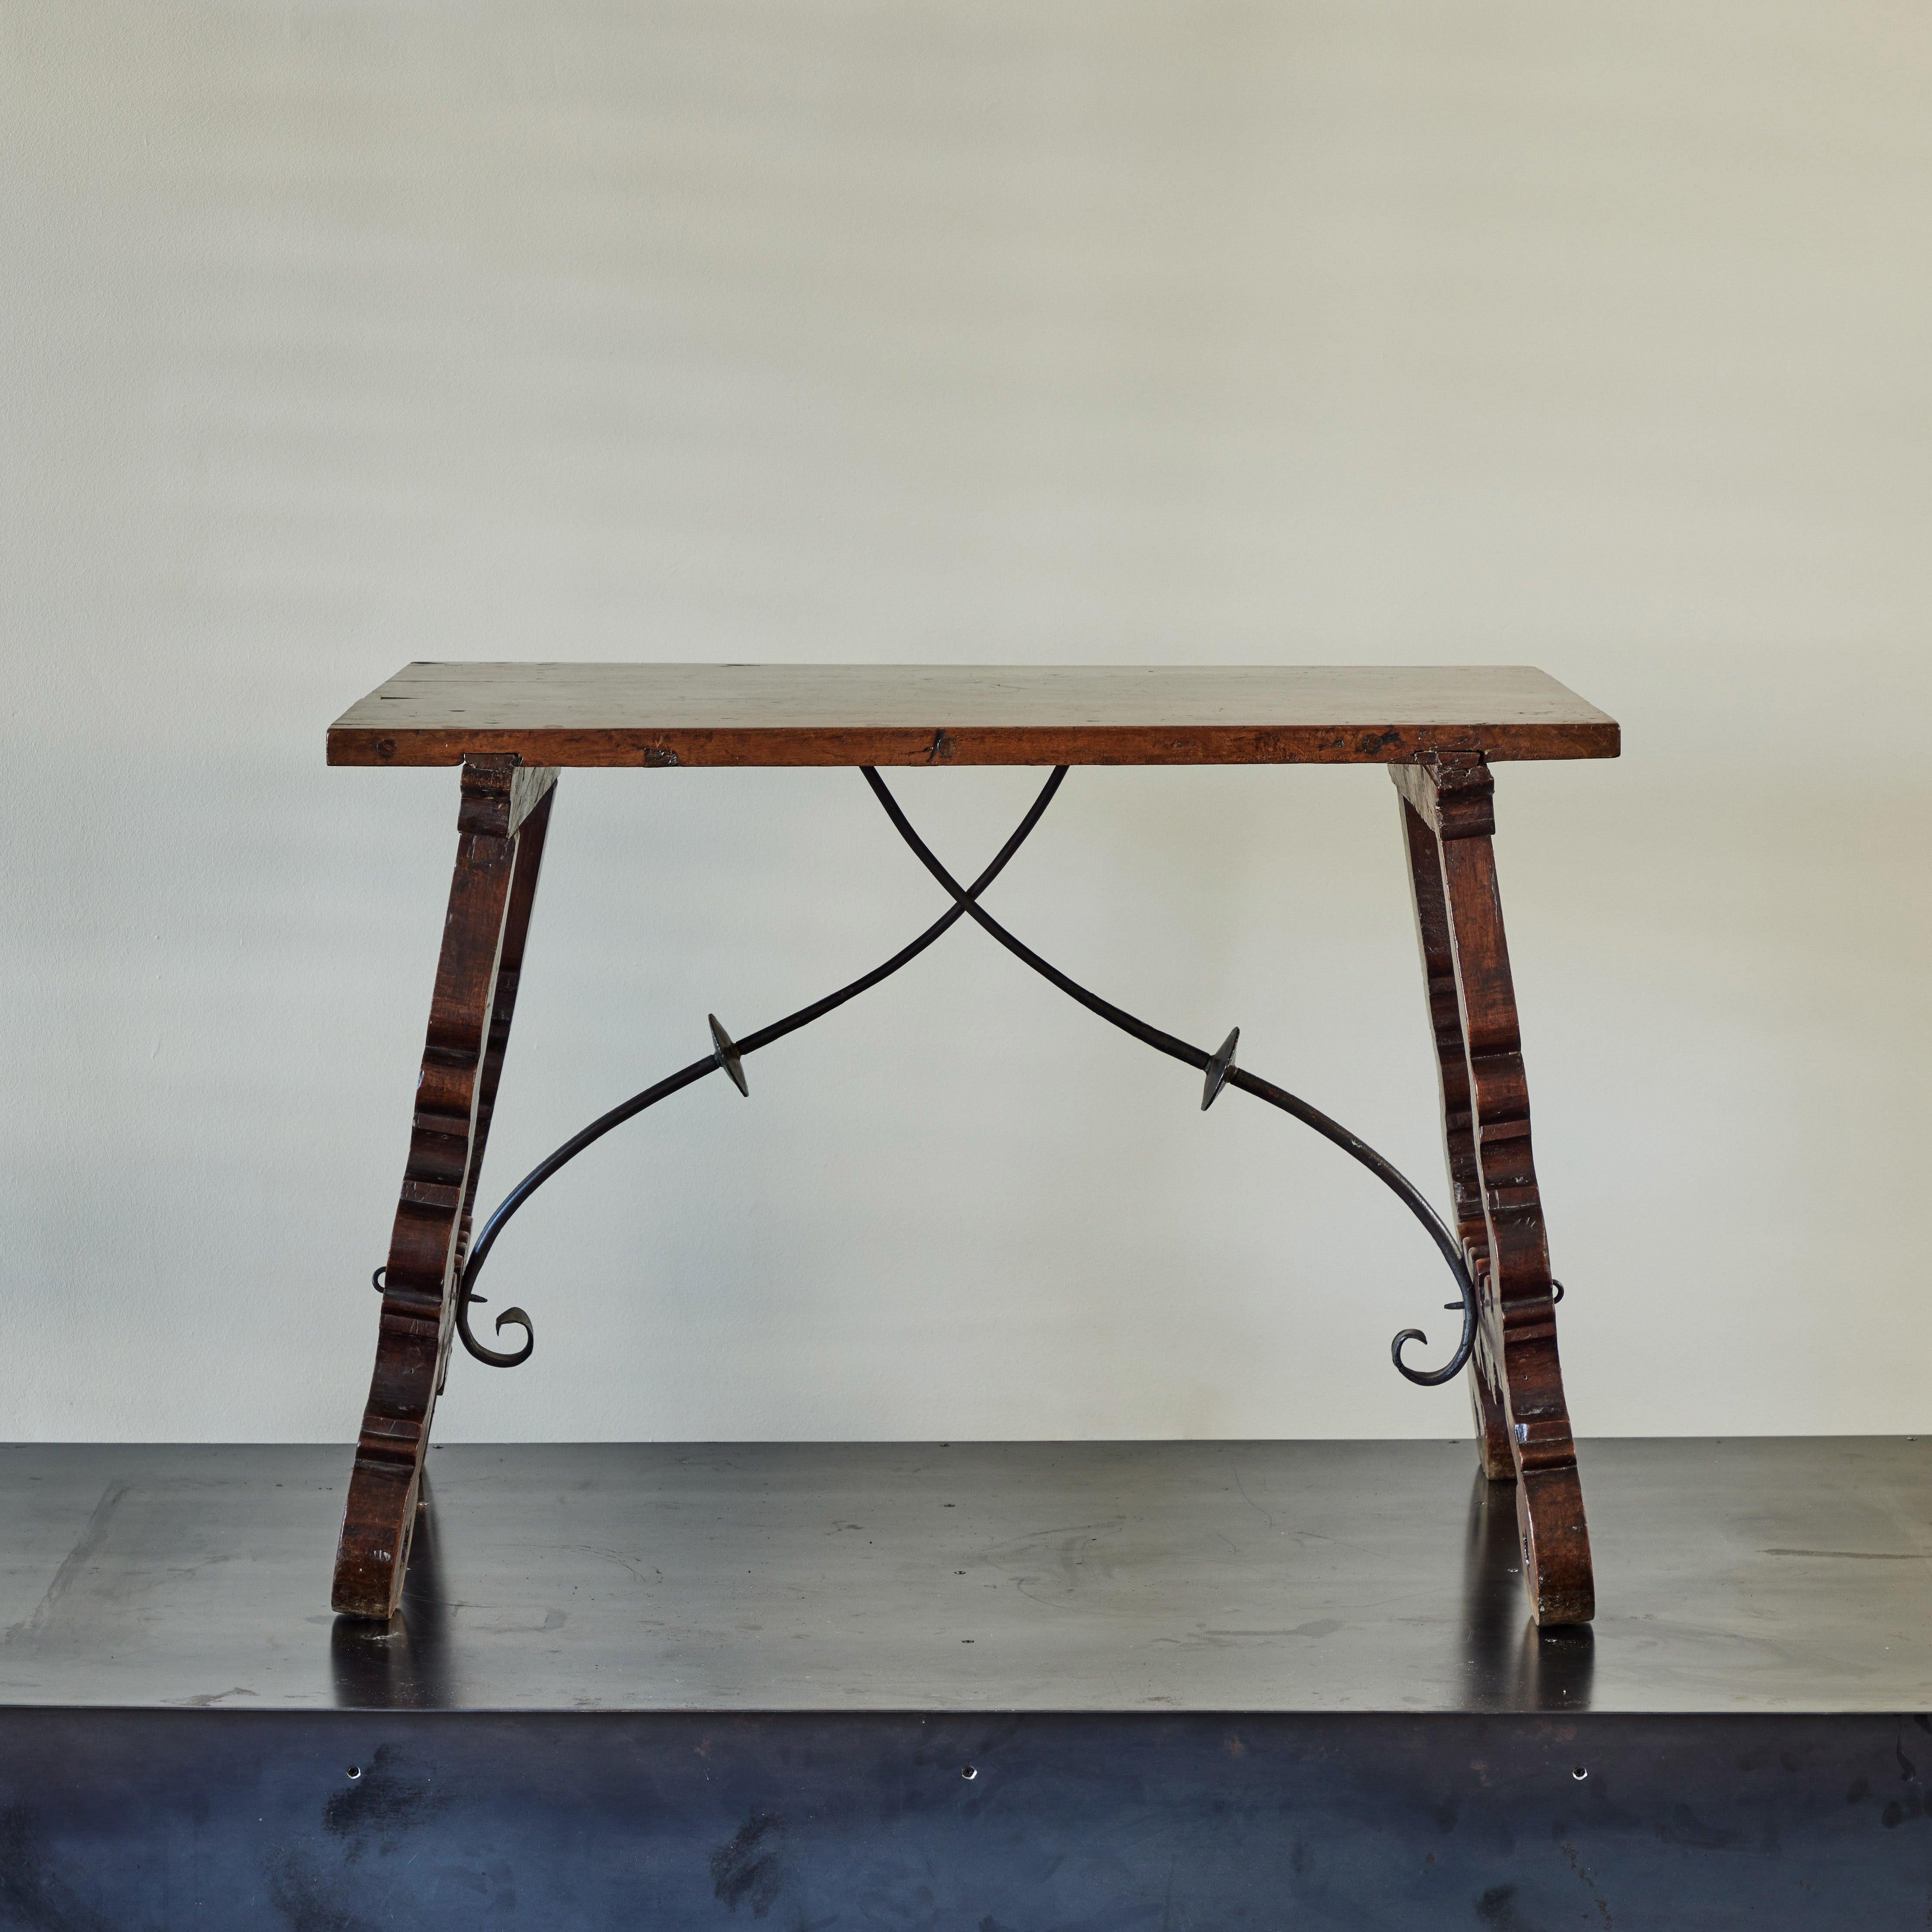 Early 19th-century Spanish hand-carved walnut table with rectangular top, rustic iron detailing and curving beveled slightly outset legs. Fantastic gothic lines and rich deep honey hue.

Spain, circa 1800

Dimensions: 41.5 W x 28.5 D x 29.5